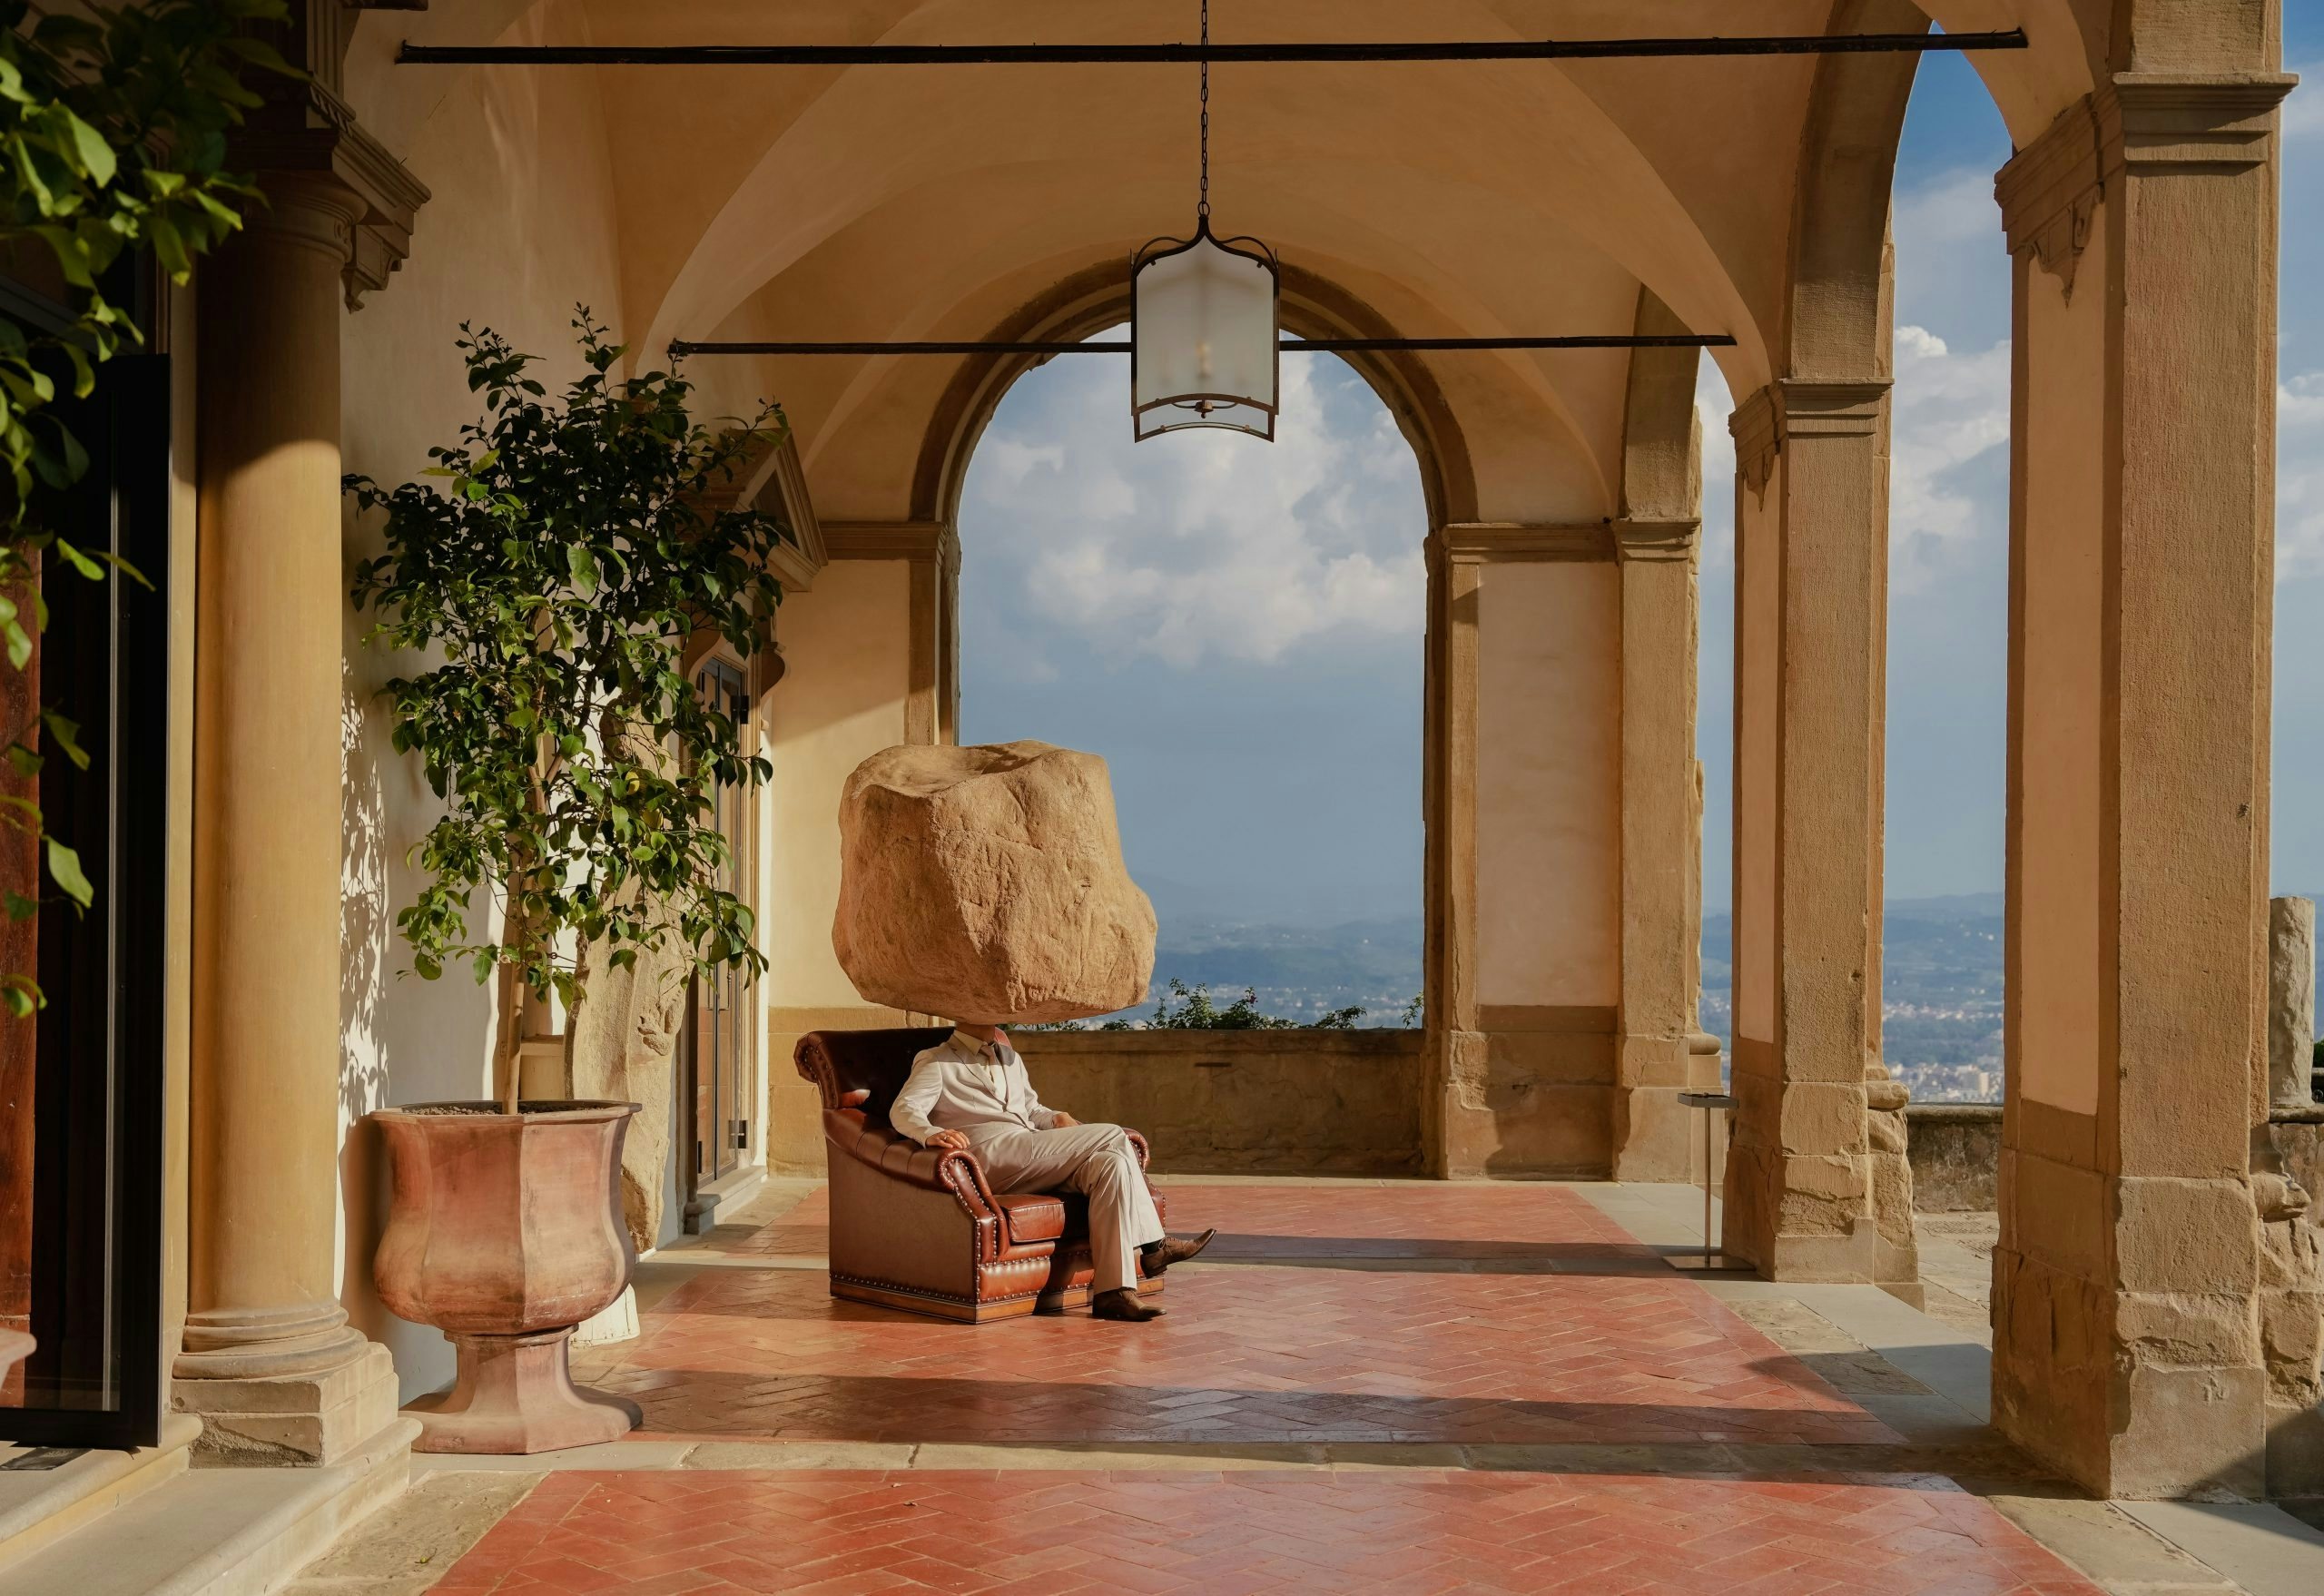 Sun Yuan & Peng Yu, Teenager Teenager, 2011 — a Mitico art installation at Villa San Michele, a Belmond Hotel, Florence, in collaboration with Galleria Continua.